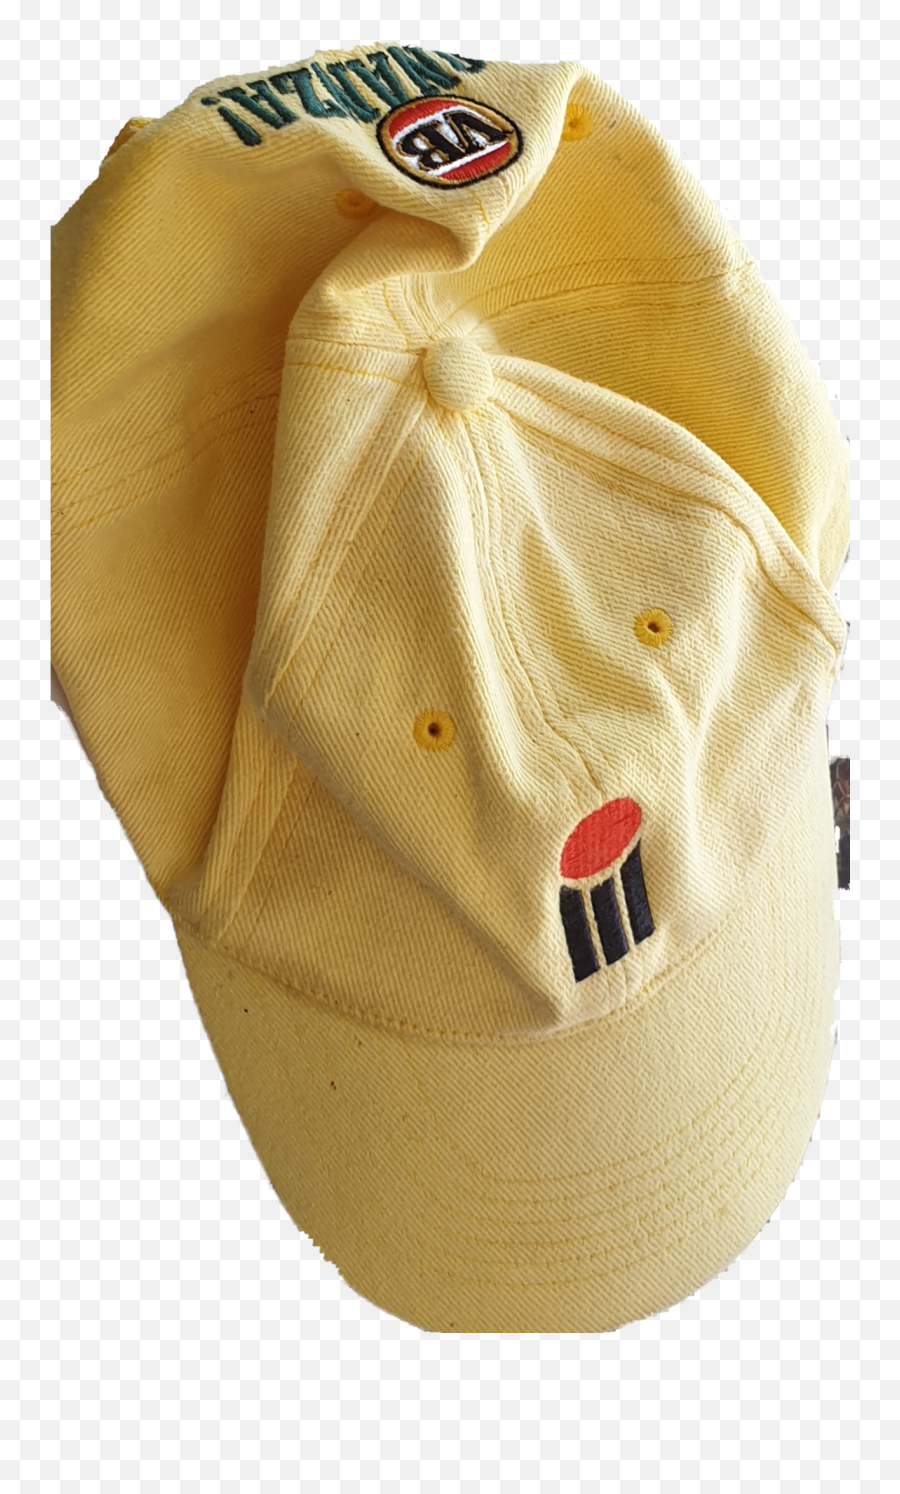 The Old Manu0027s World Series Cricket Hat Australia Emoji,Emoticons By Mikeal West